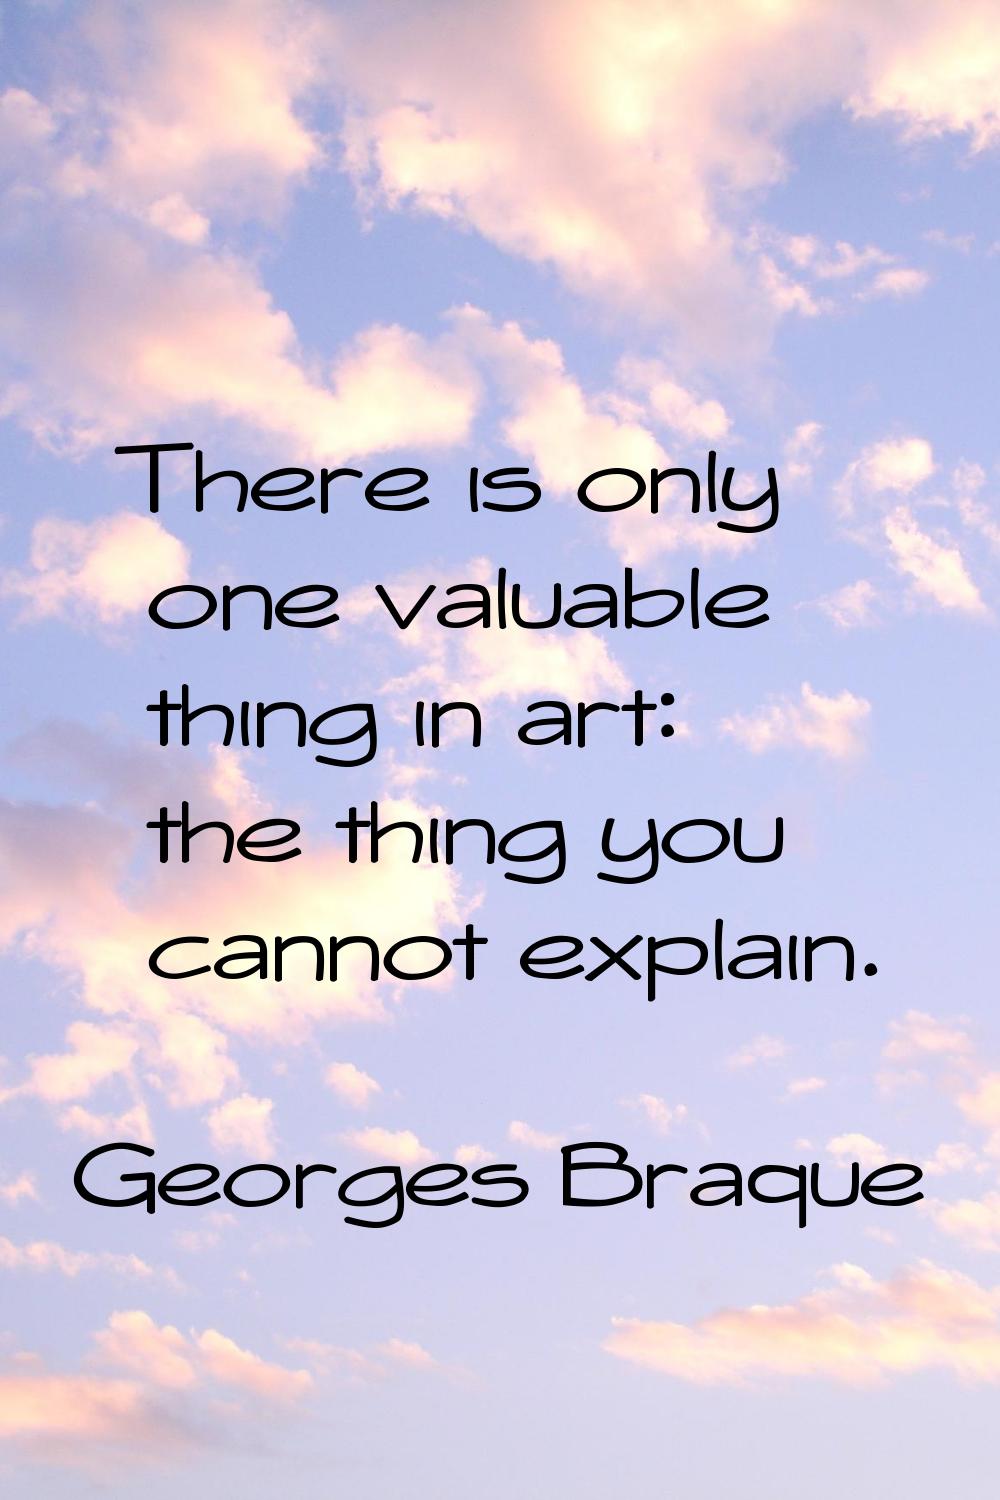 There is only one valuable thing in art: the thing you cannot explain.